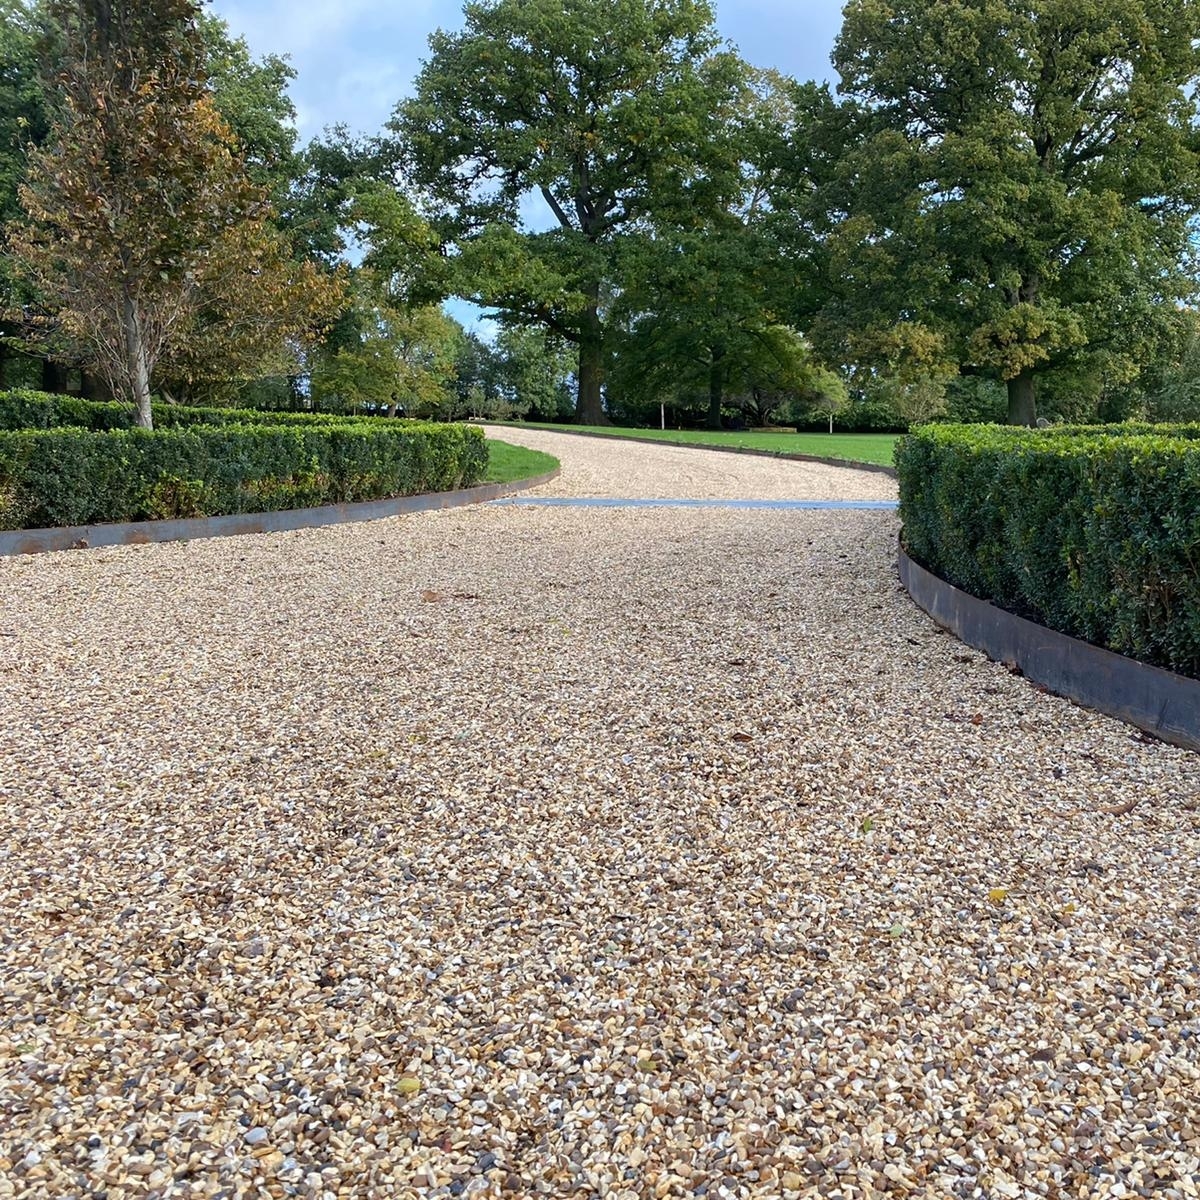 We specialise in Gravel Edging for driveways, paths and lawn areas. Gravel Edging is the perfect solution to stopping movement of gravel between your driveway, lawn or other garden areas.

#gravel
#driveway
#solidsteel
#thetraditionalco